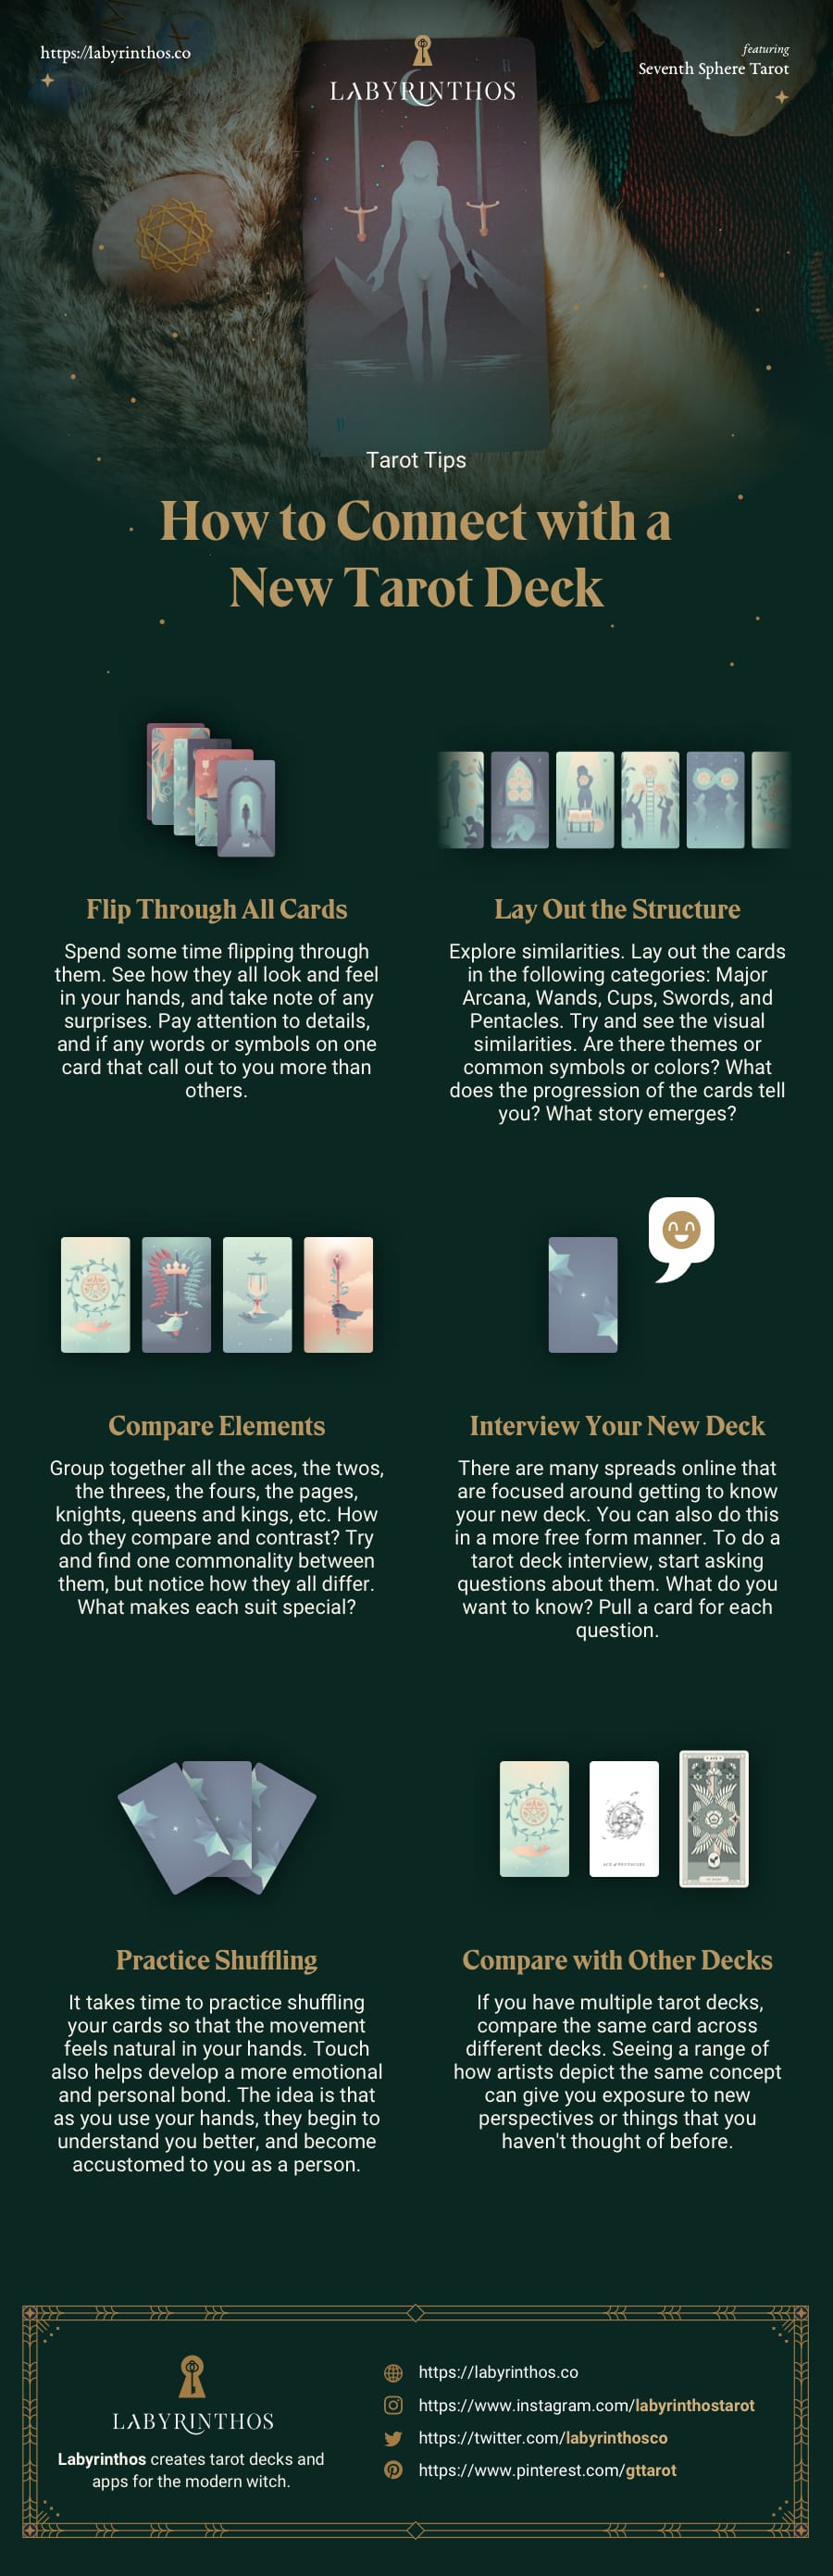 How to connect to a new tarot deck - Infographic